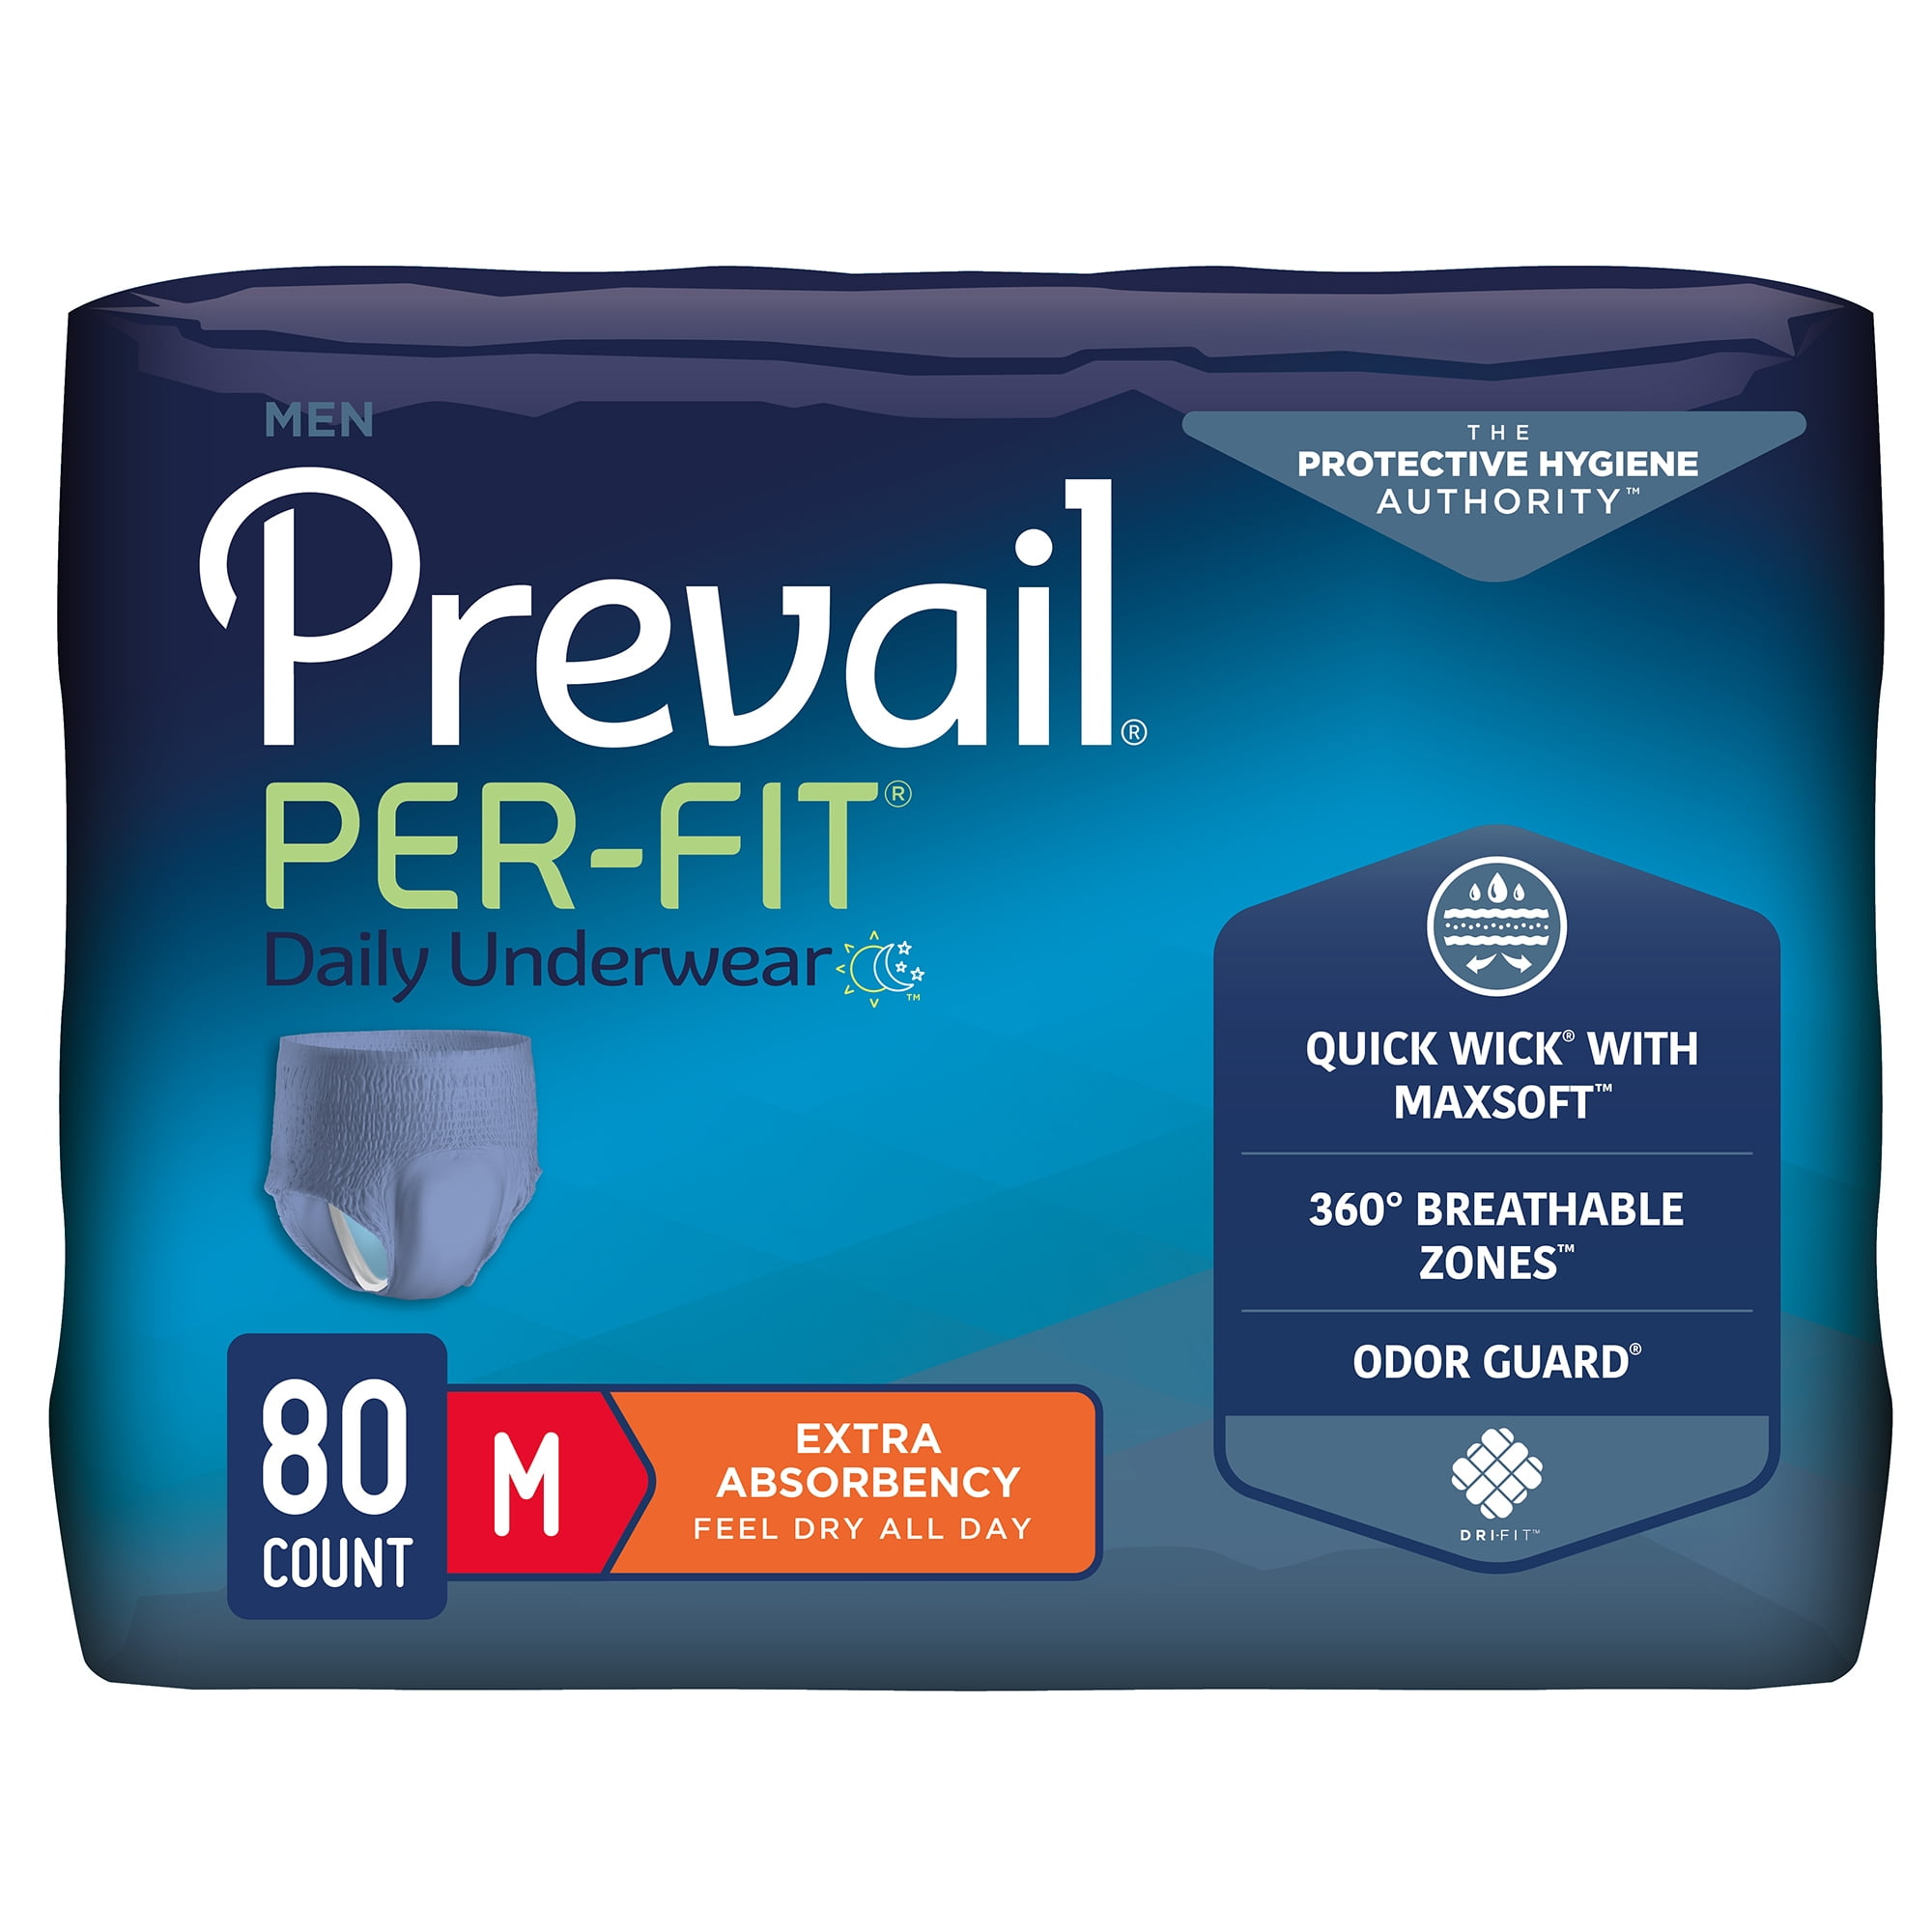 Prevail Per-Fit Underwear, Medium Fits 34 To 46 Inches - 20 Ea, 4 Pack